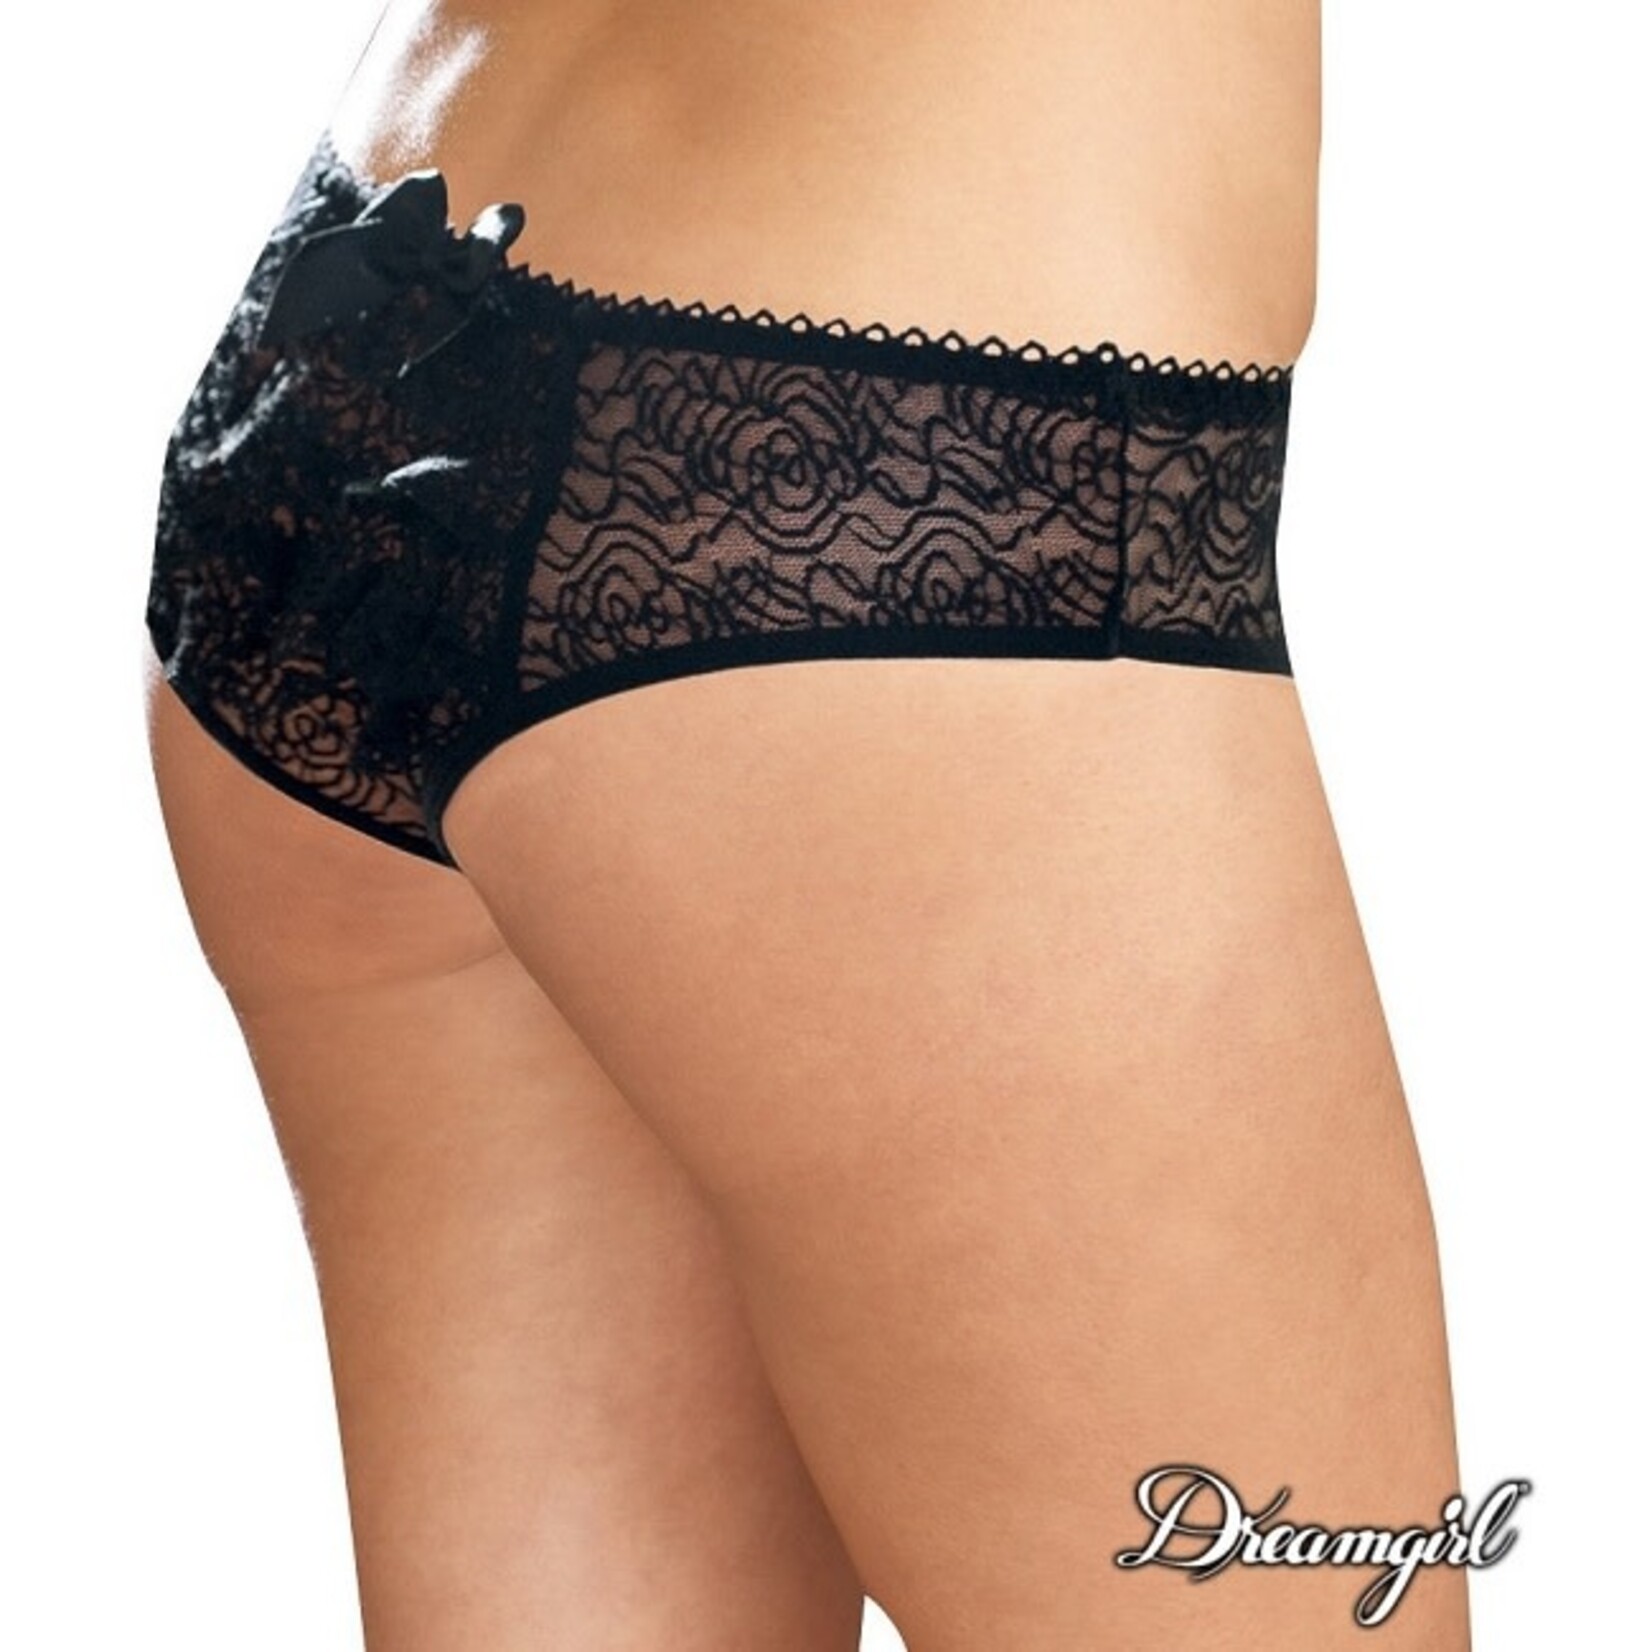 Dreamgirl Dreamgirl Ruffled Fun Crotchless Panty Queen